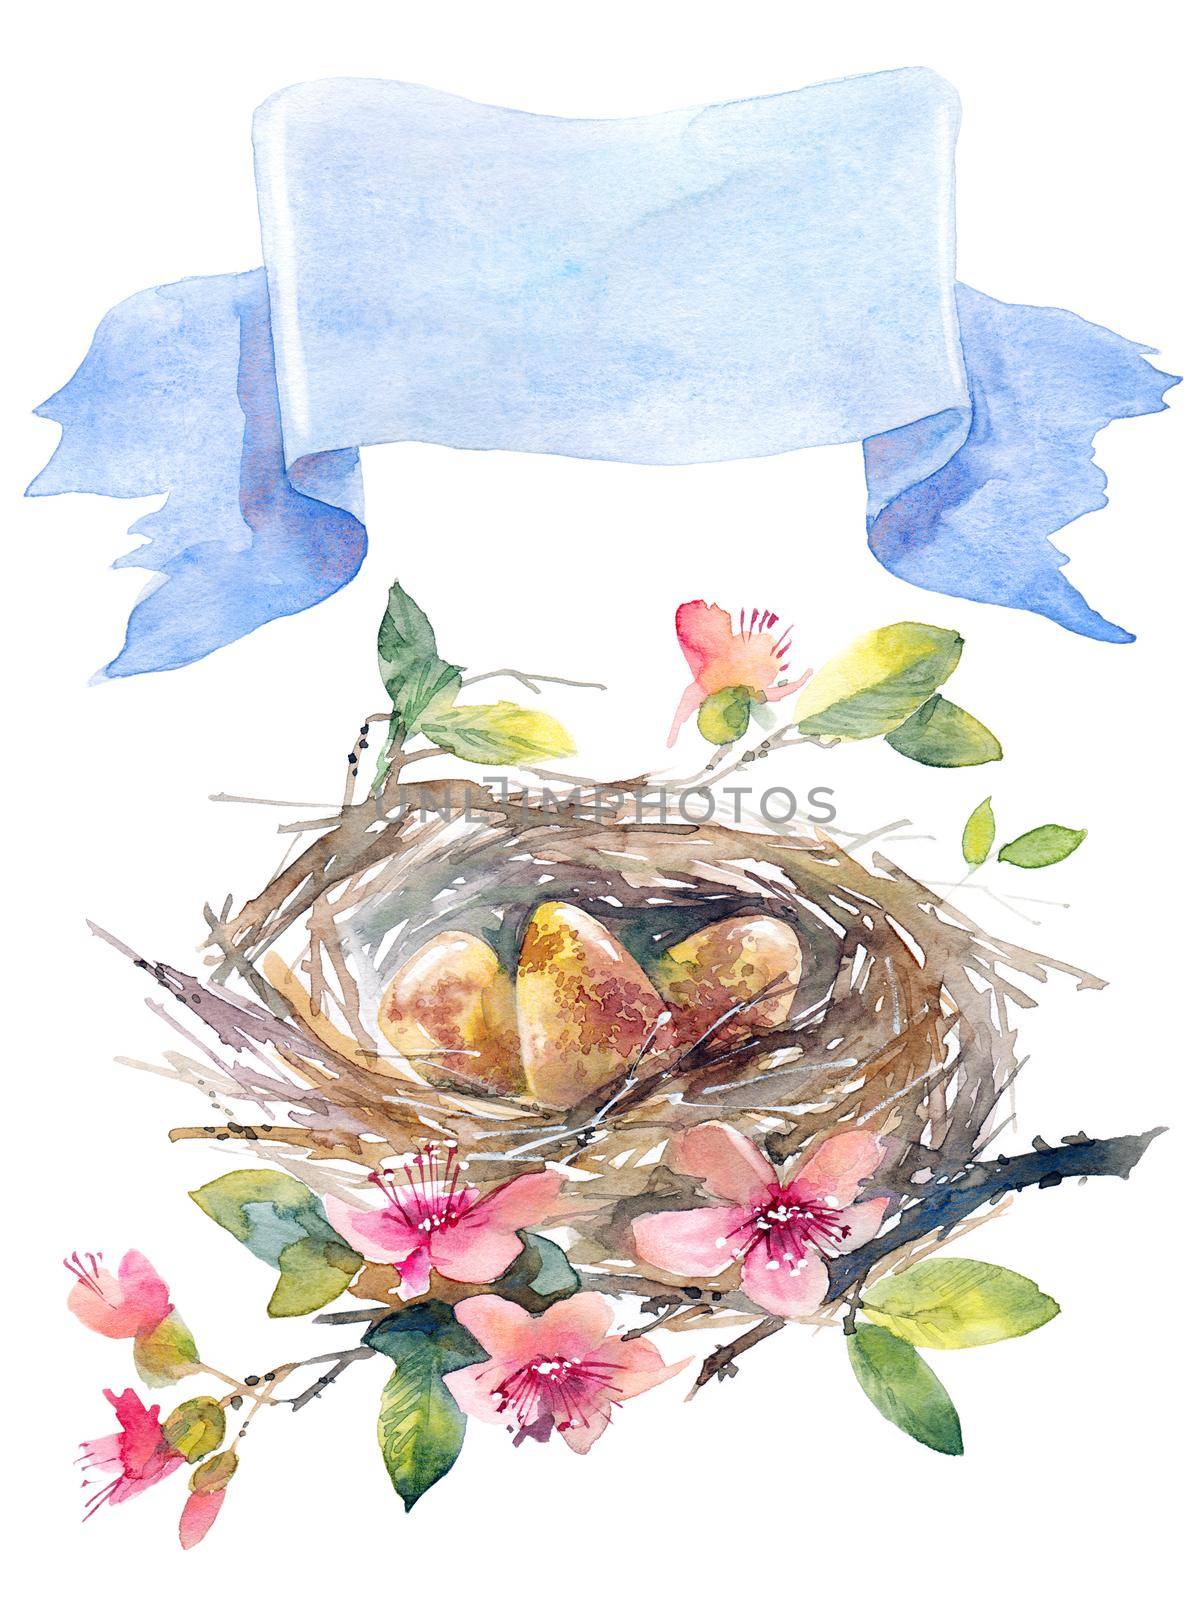 Watercolor greeting card for Easter day - bird nest with eggs, flowers and lent banner for text